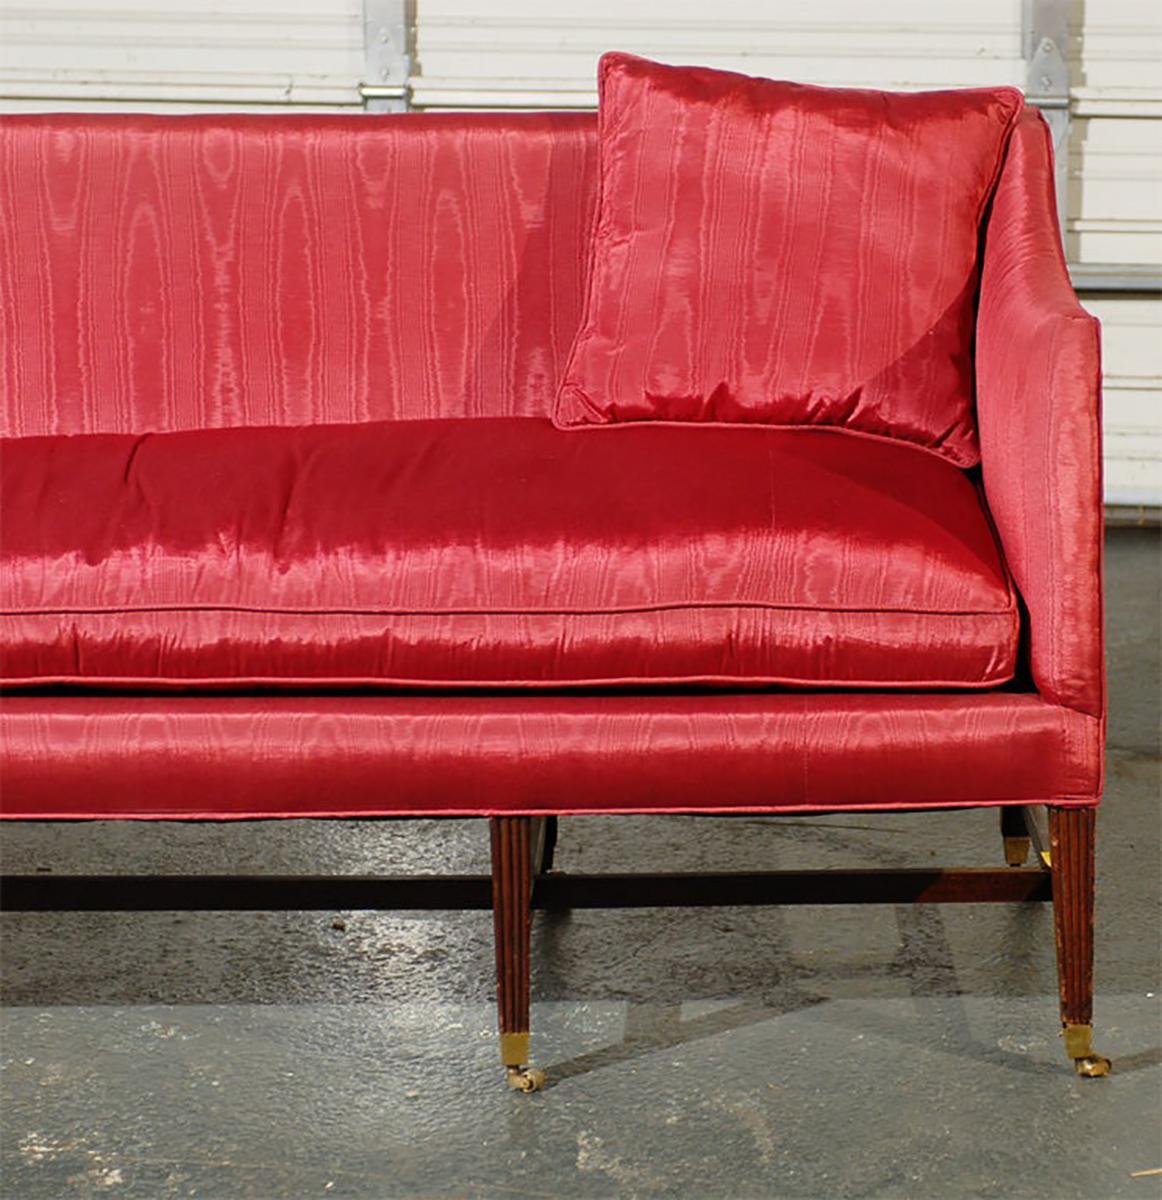 Upholstery 19th Century English Regency Style Upholstered Settee, circa 1820 For Sale